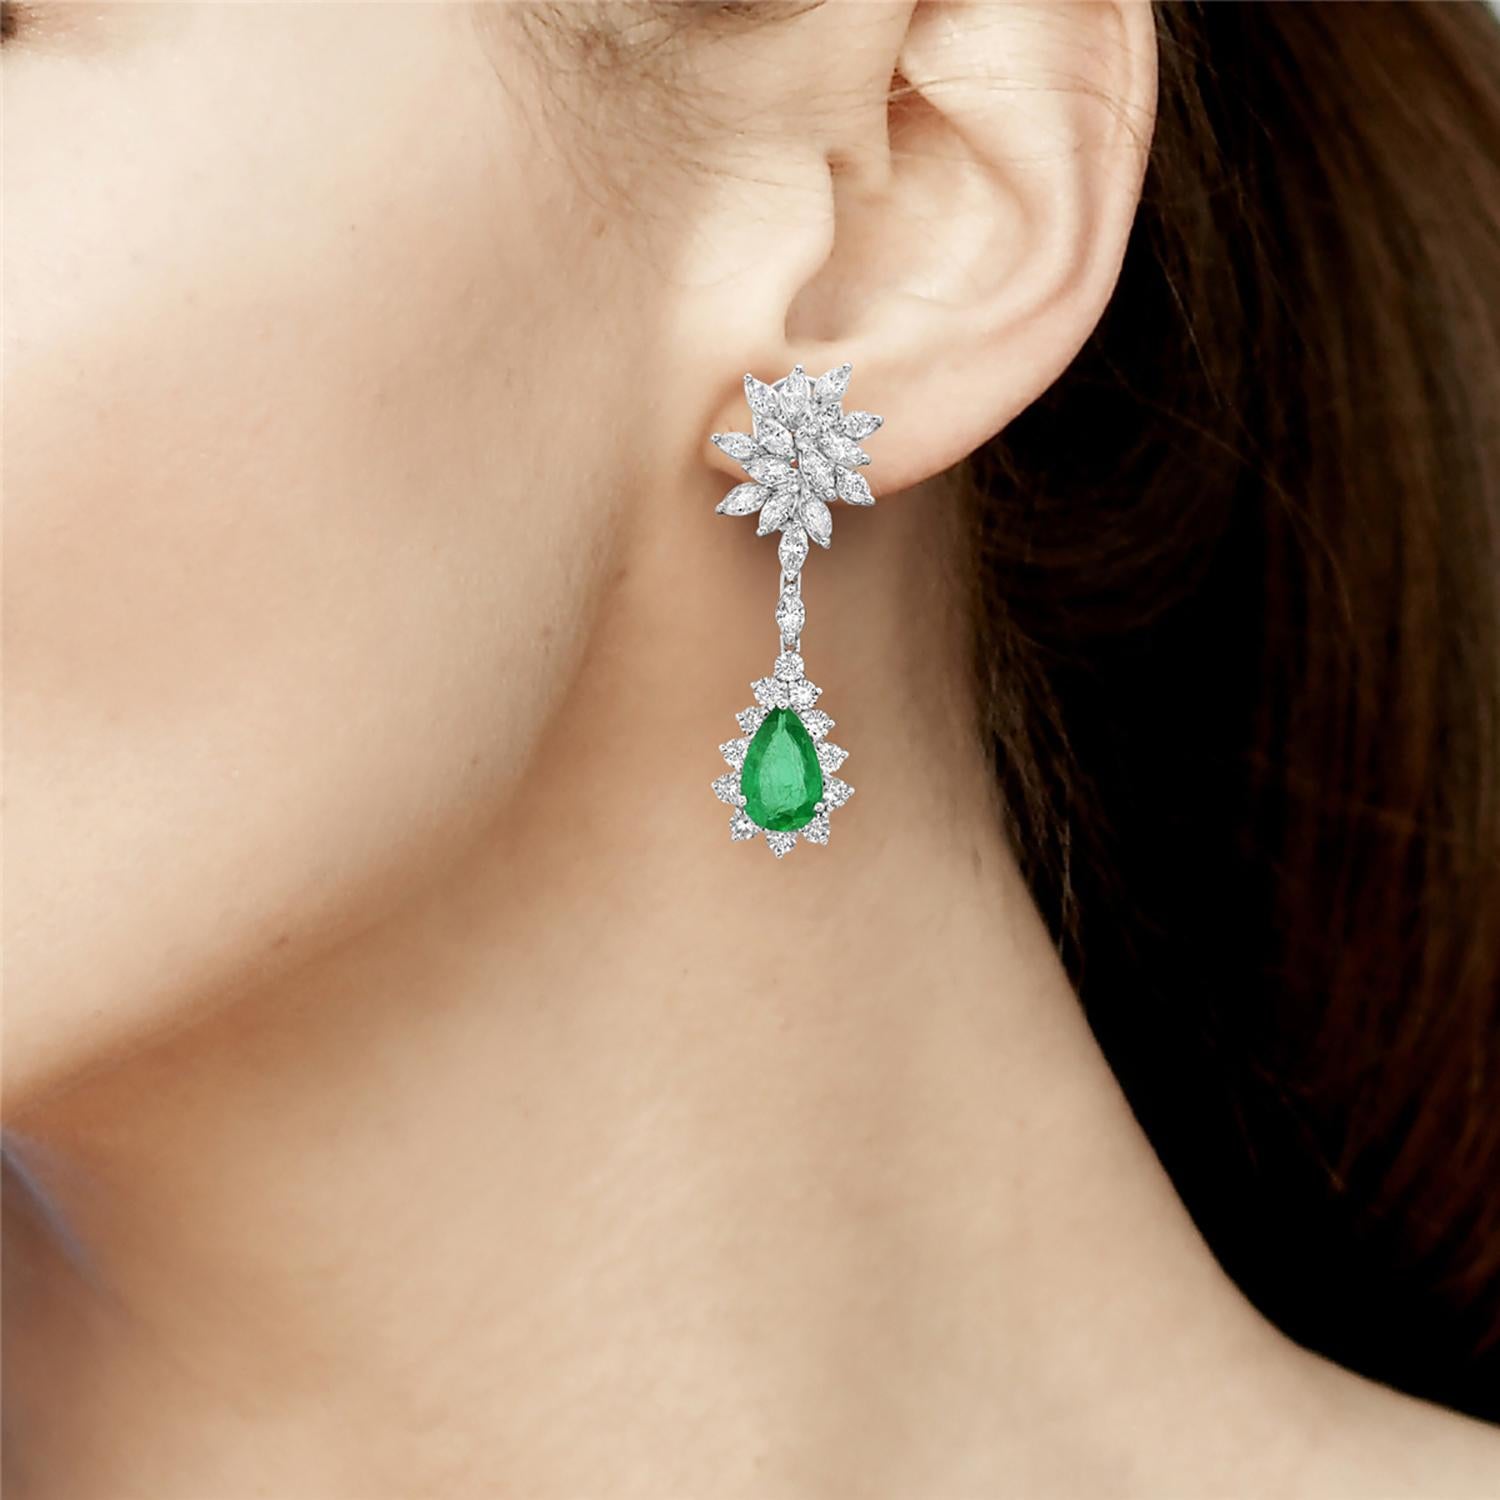 These 18k white gold earrings showcase a striking starburst design with a dazzling pear-shaped emerald,  surrounded by a halo of diamonds. These earrings are a stunning addition to any jewelry collection, perfect for dressing up any outfit with a